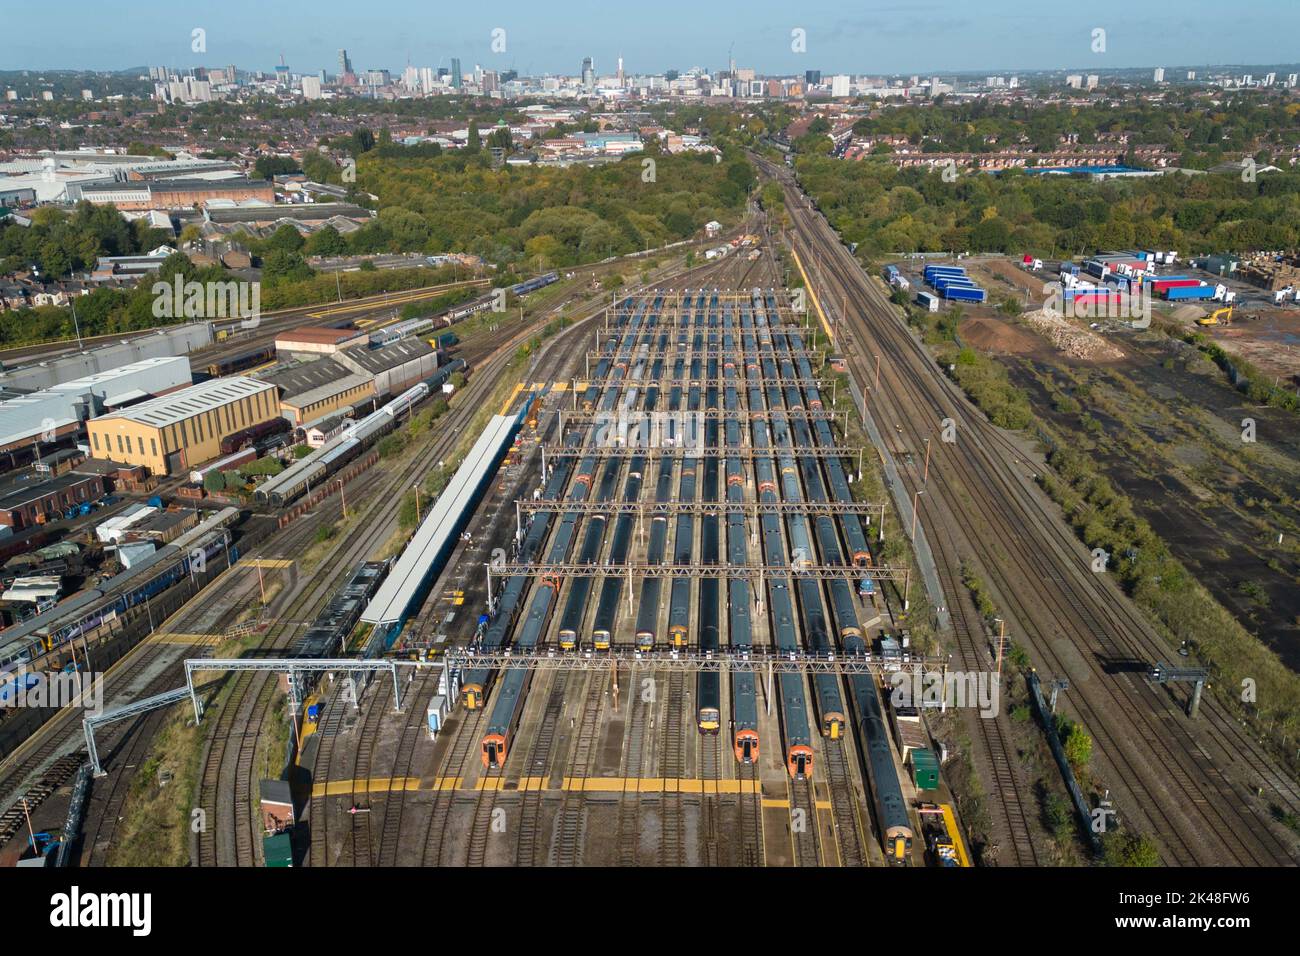 Tyseley, Birmingham, UK. October 1st 2022 - Unused and parked West Midlands Railway trains at the Tyseley train maintenance depot with the Birmingham skyline in the distance as rail workers take part in continued strike action. Pic by Credit: Scott CM/Alamy Live News Stock Photo